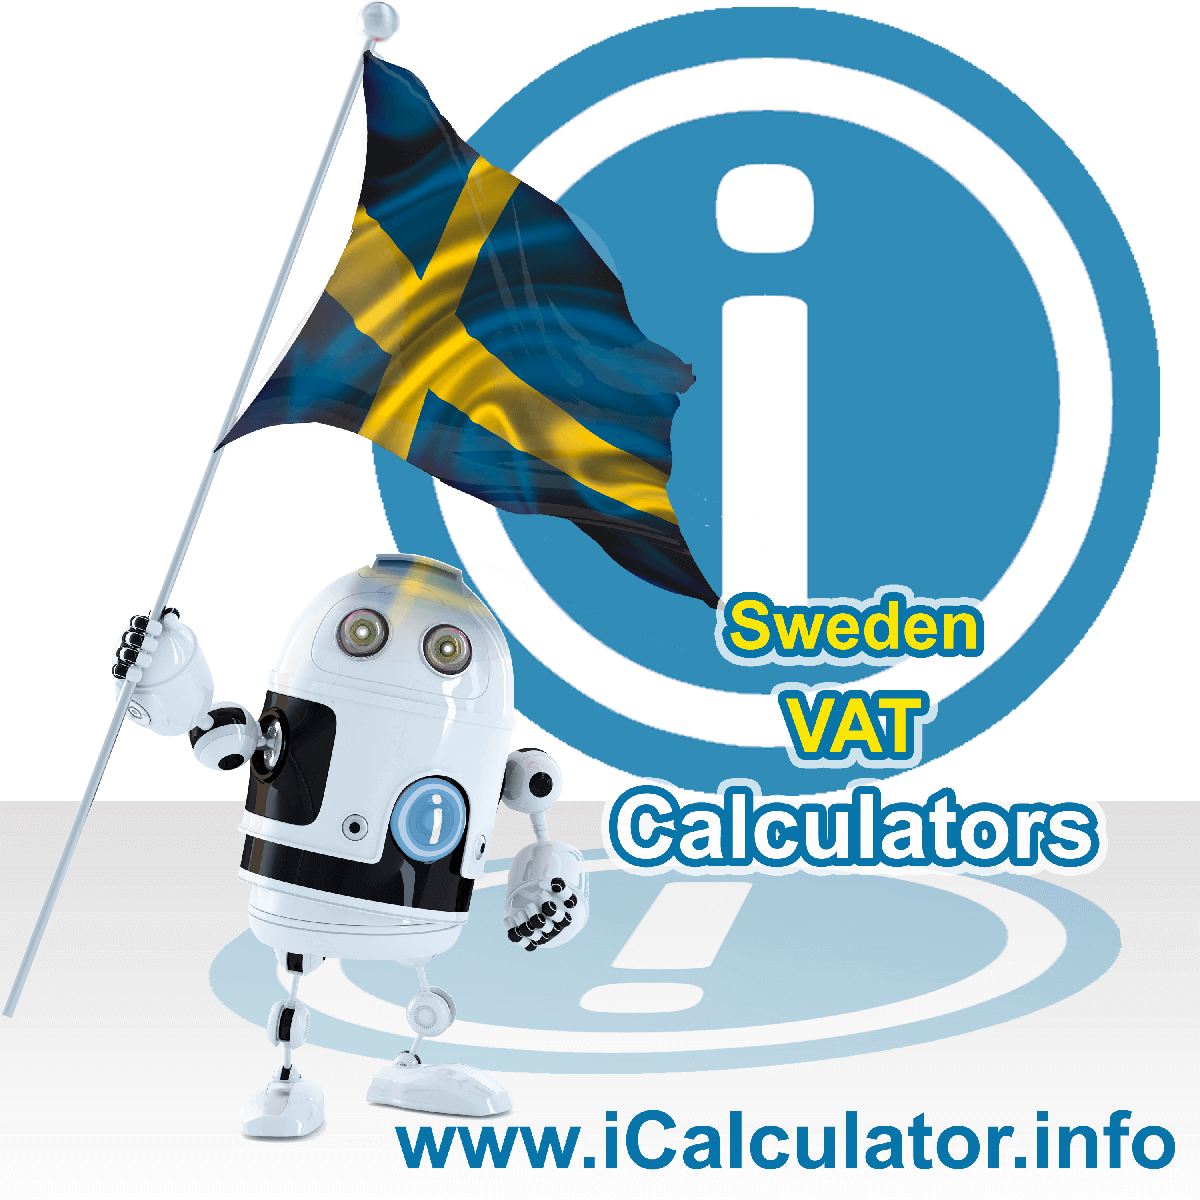 Sweden VAT Calculator. This image shows the Sweden flag and information relating to the VAT formula used for calculating Value Added Tax in Sweden using the Sweden VAT Calculator in 2023